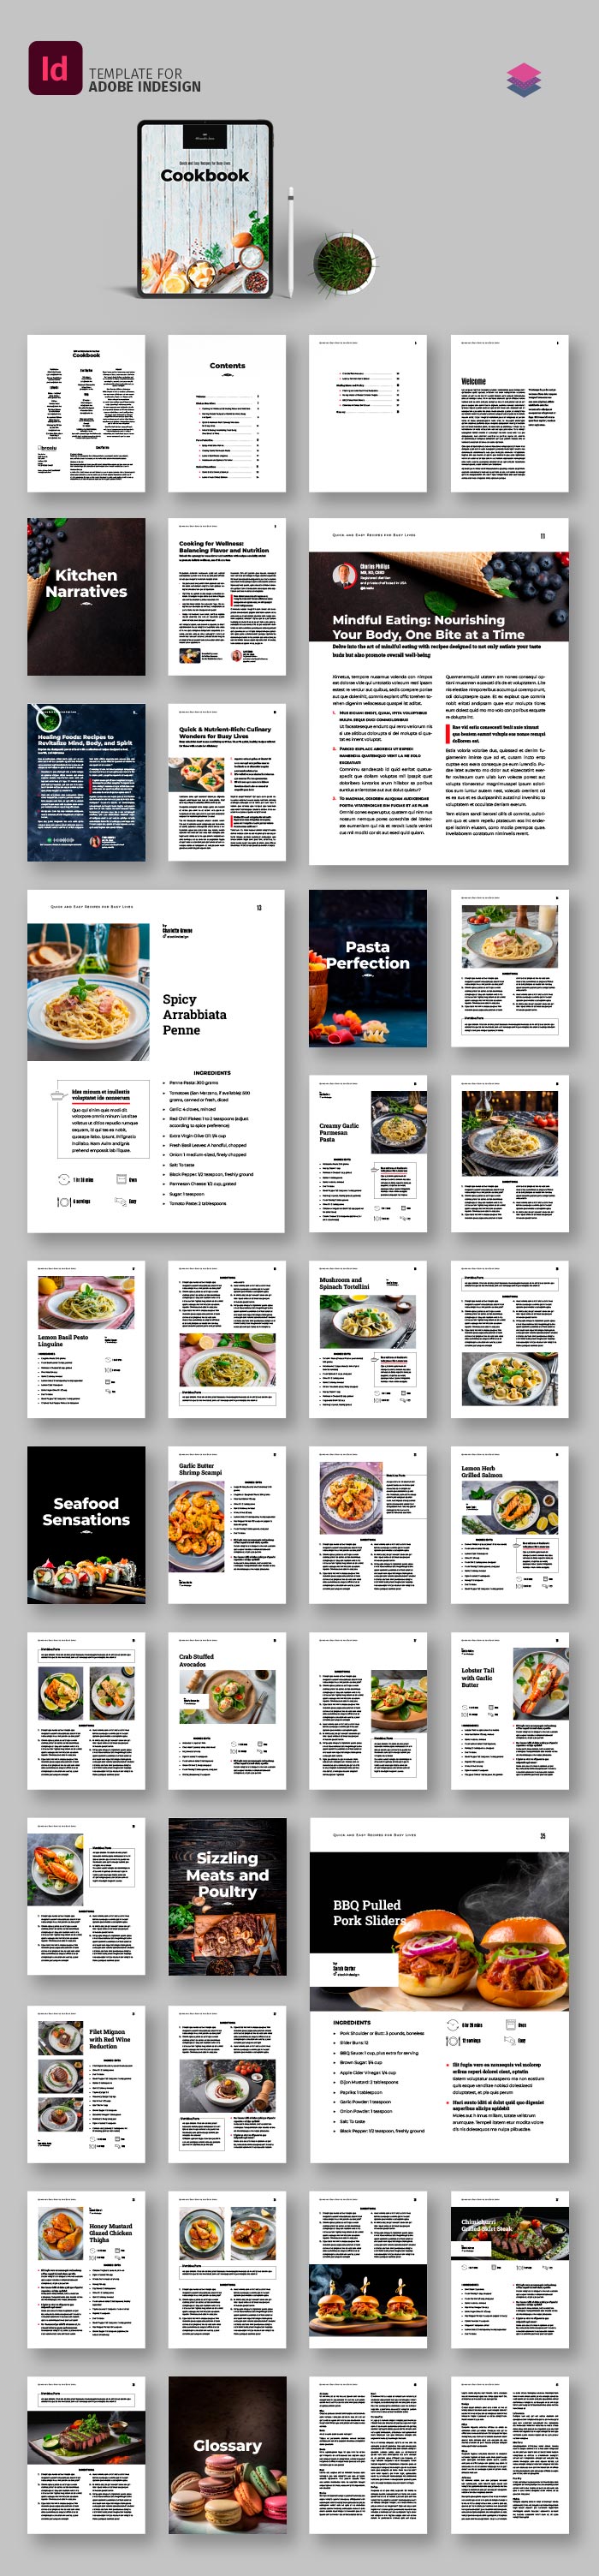 InDesign Template for Cookbook